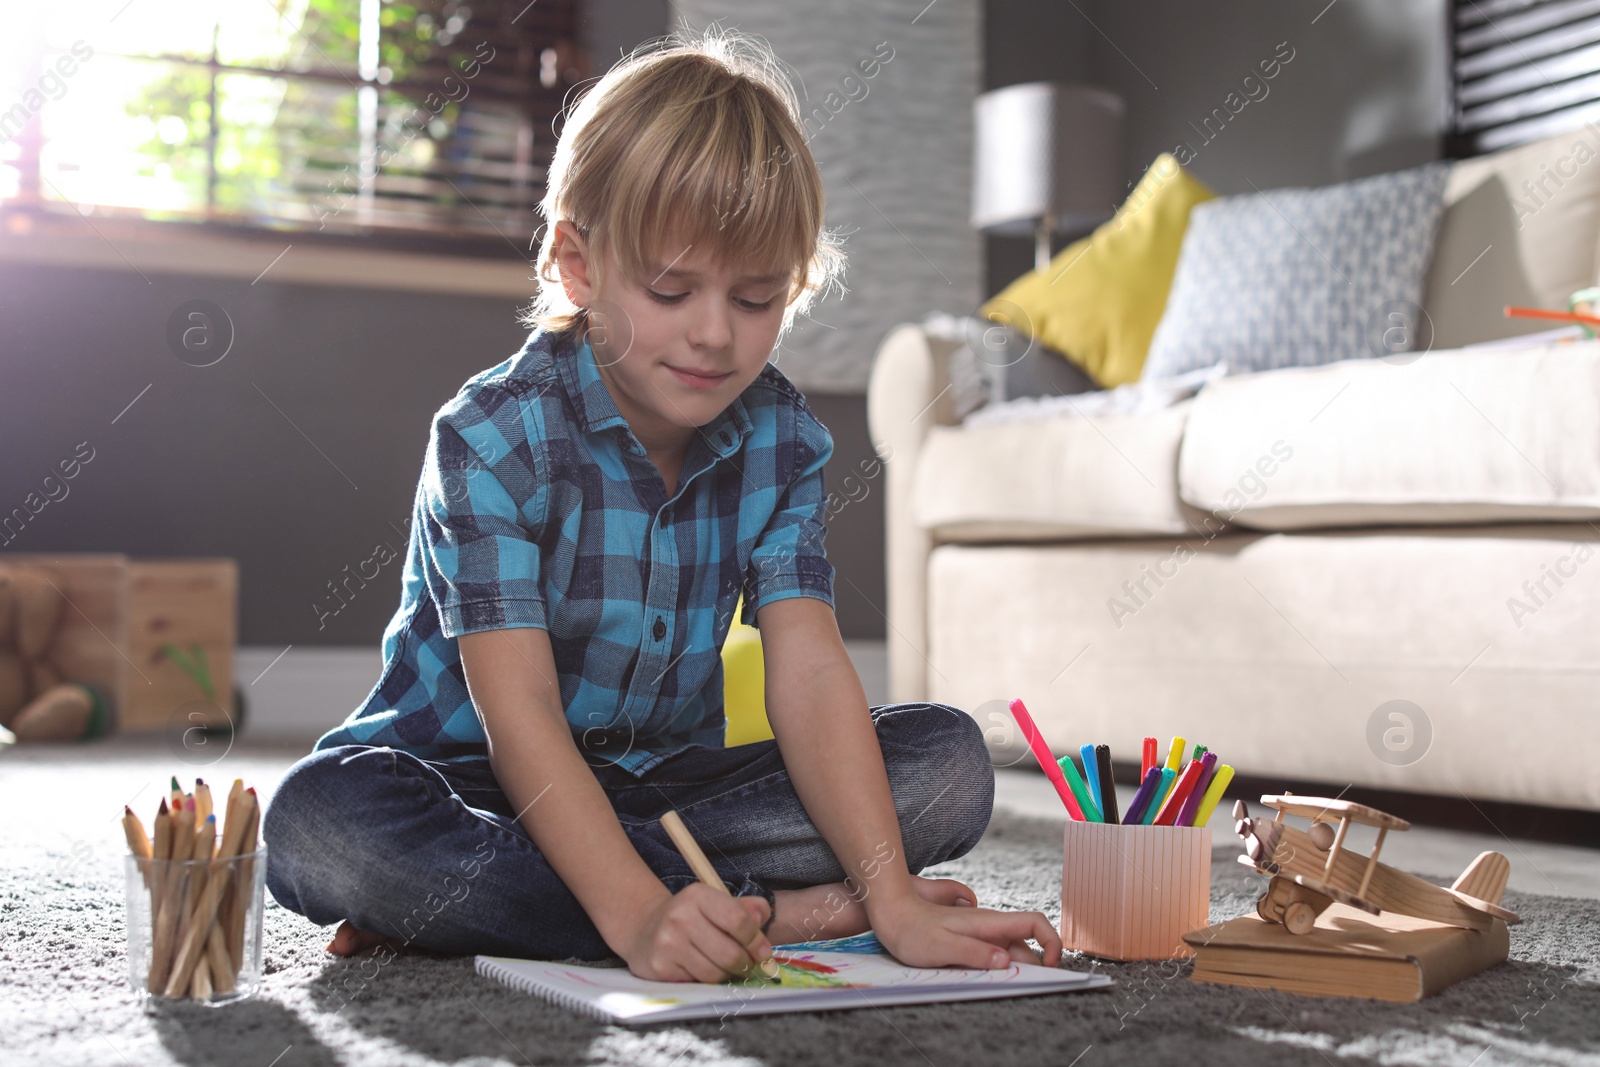 Photo of Little boy drawing on floor at home. Creative hobby